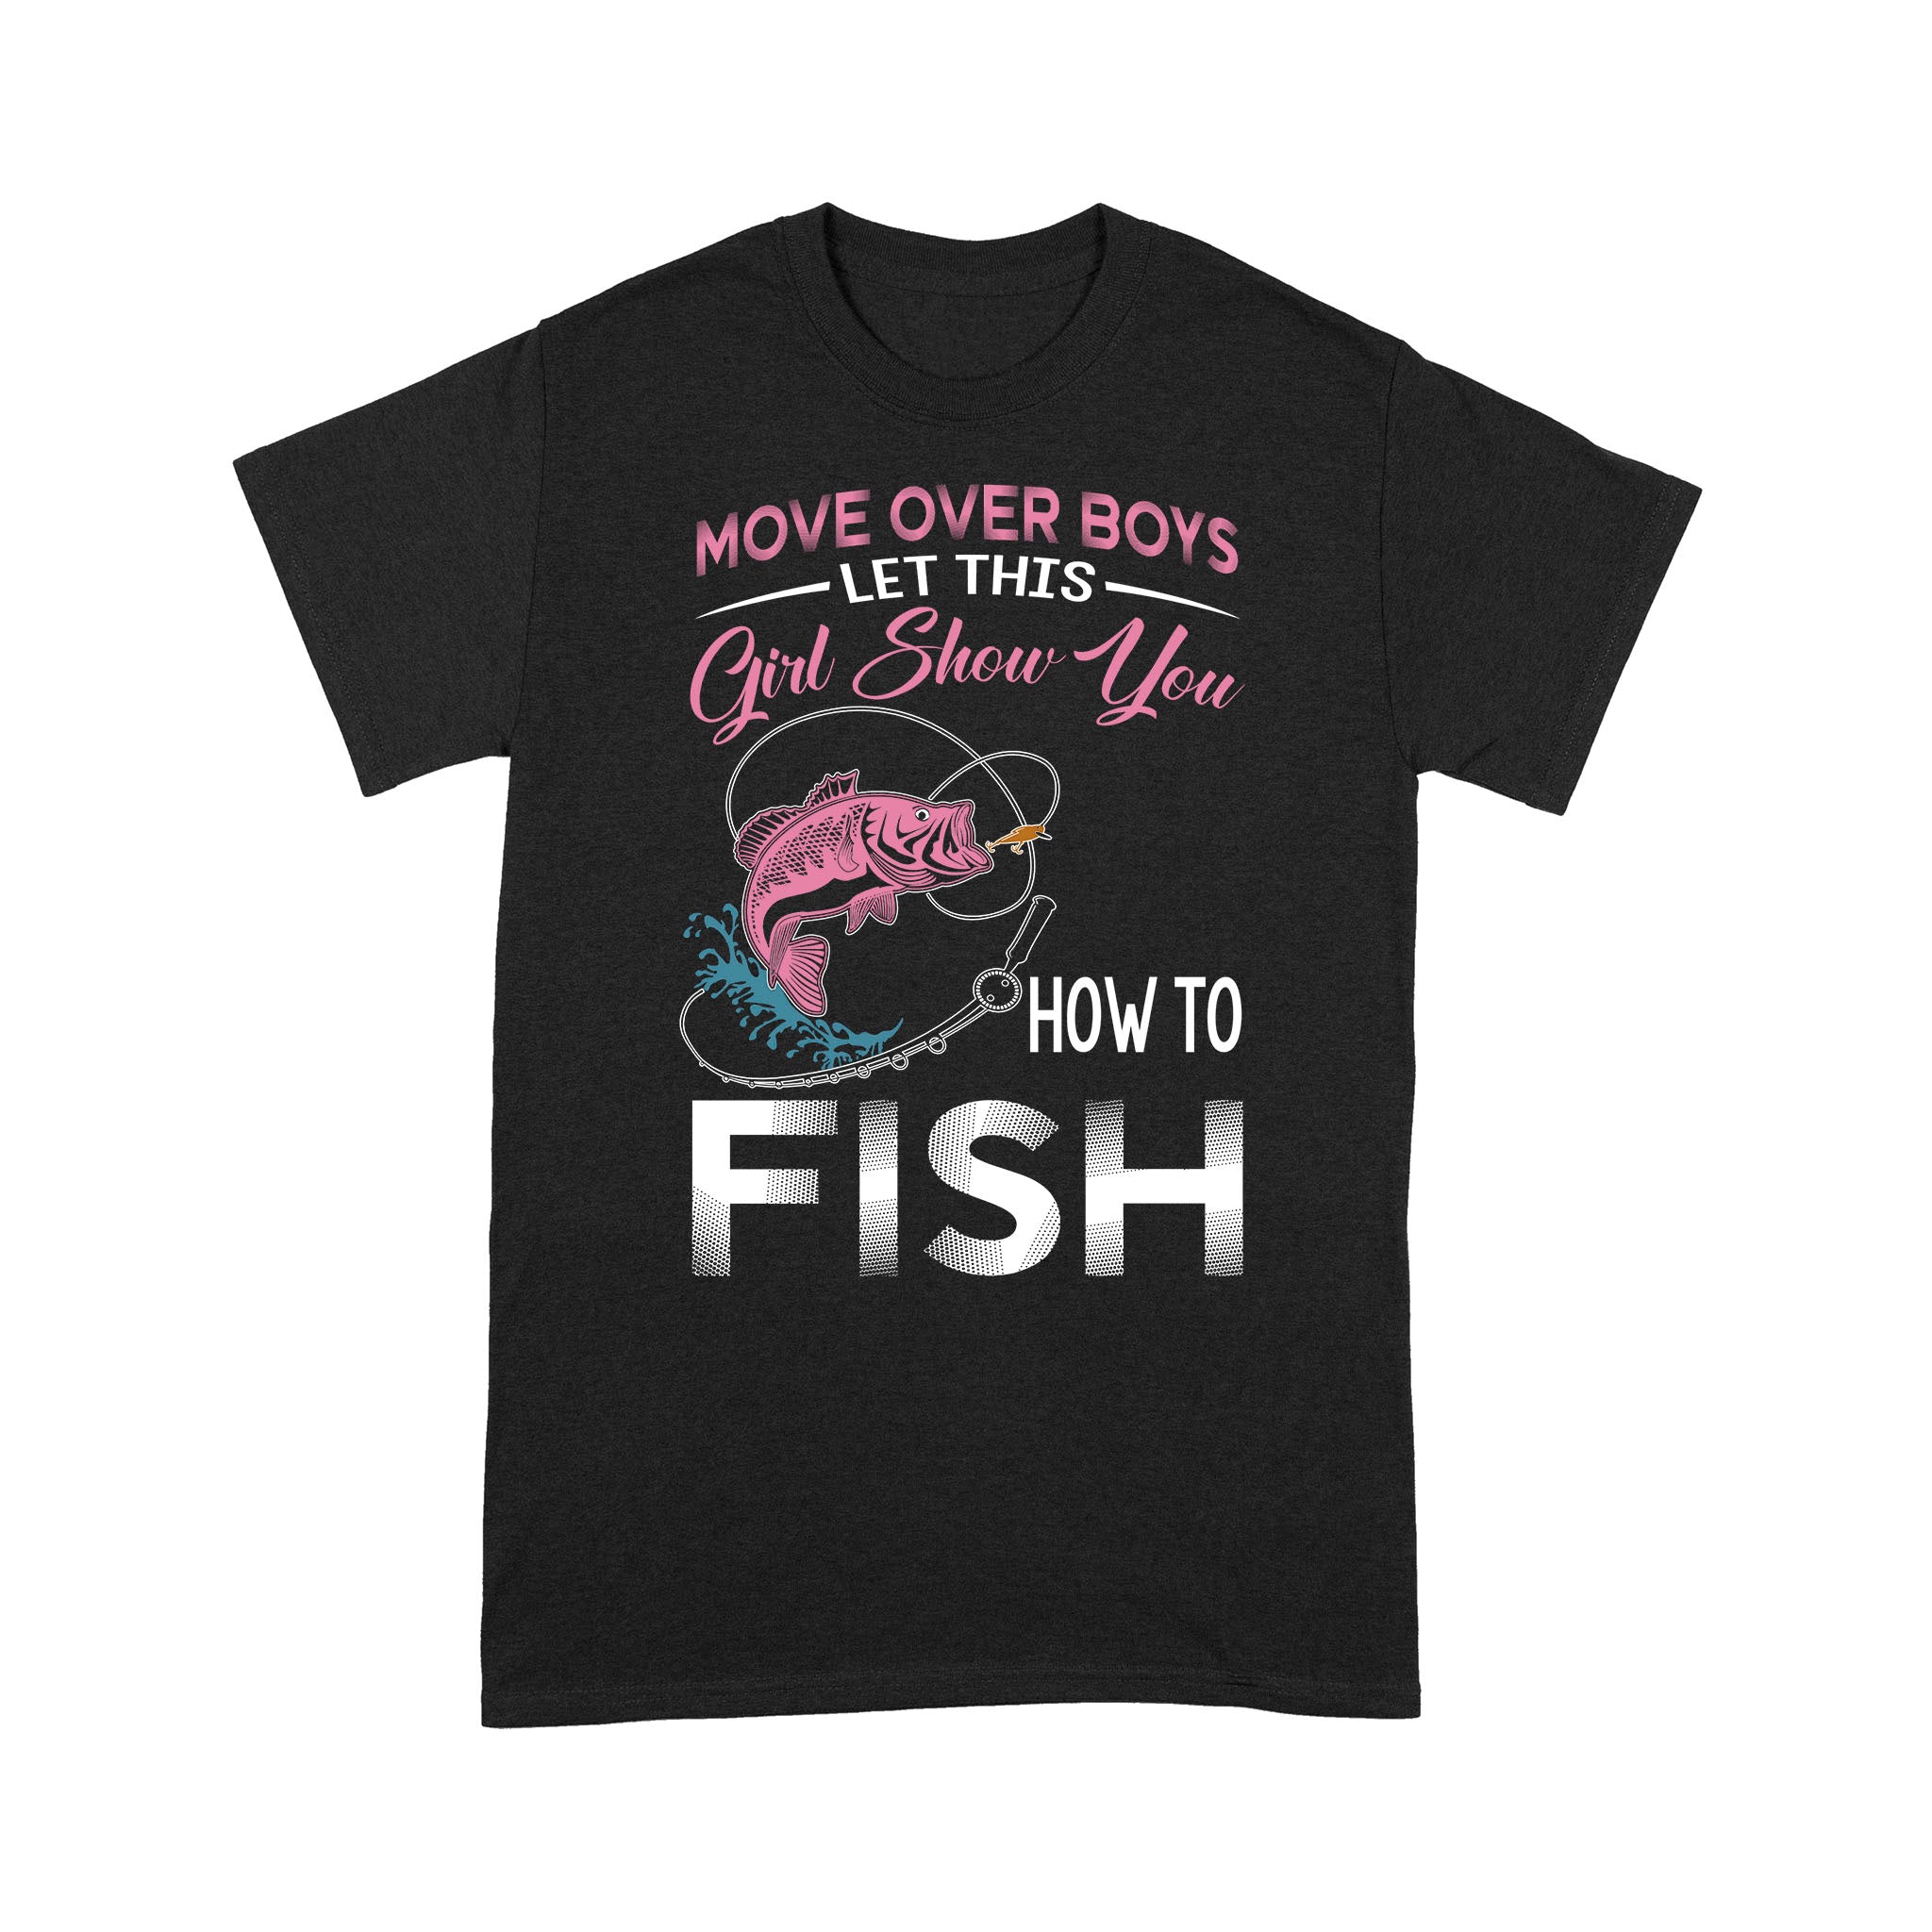 Move over boys let this girl show you how to fish pink women fishing shirts D02 NQS2824 - Standard T-Shirt